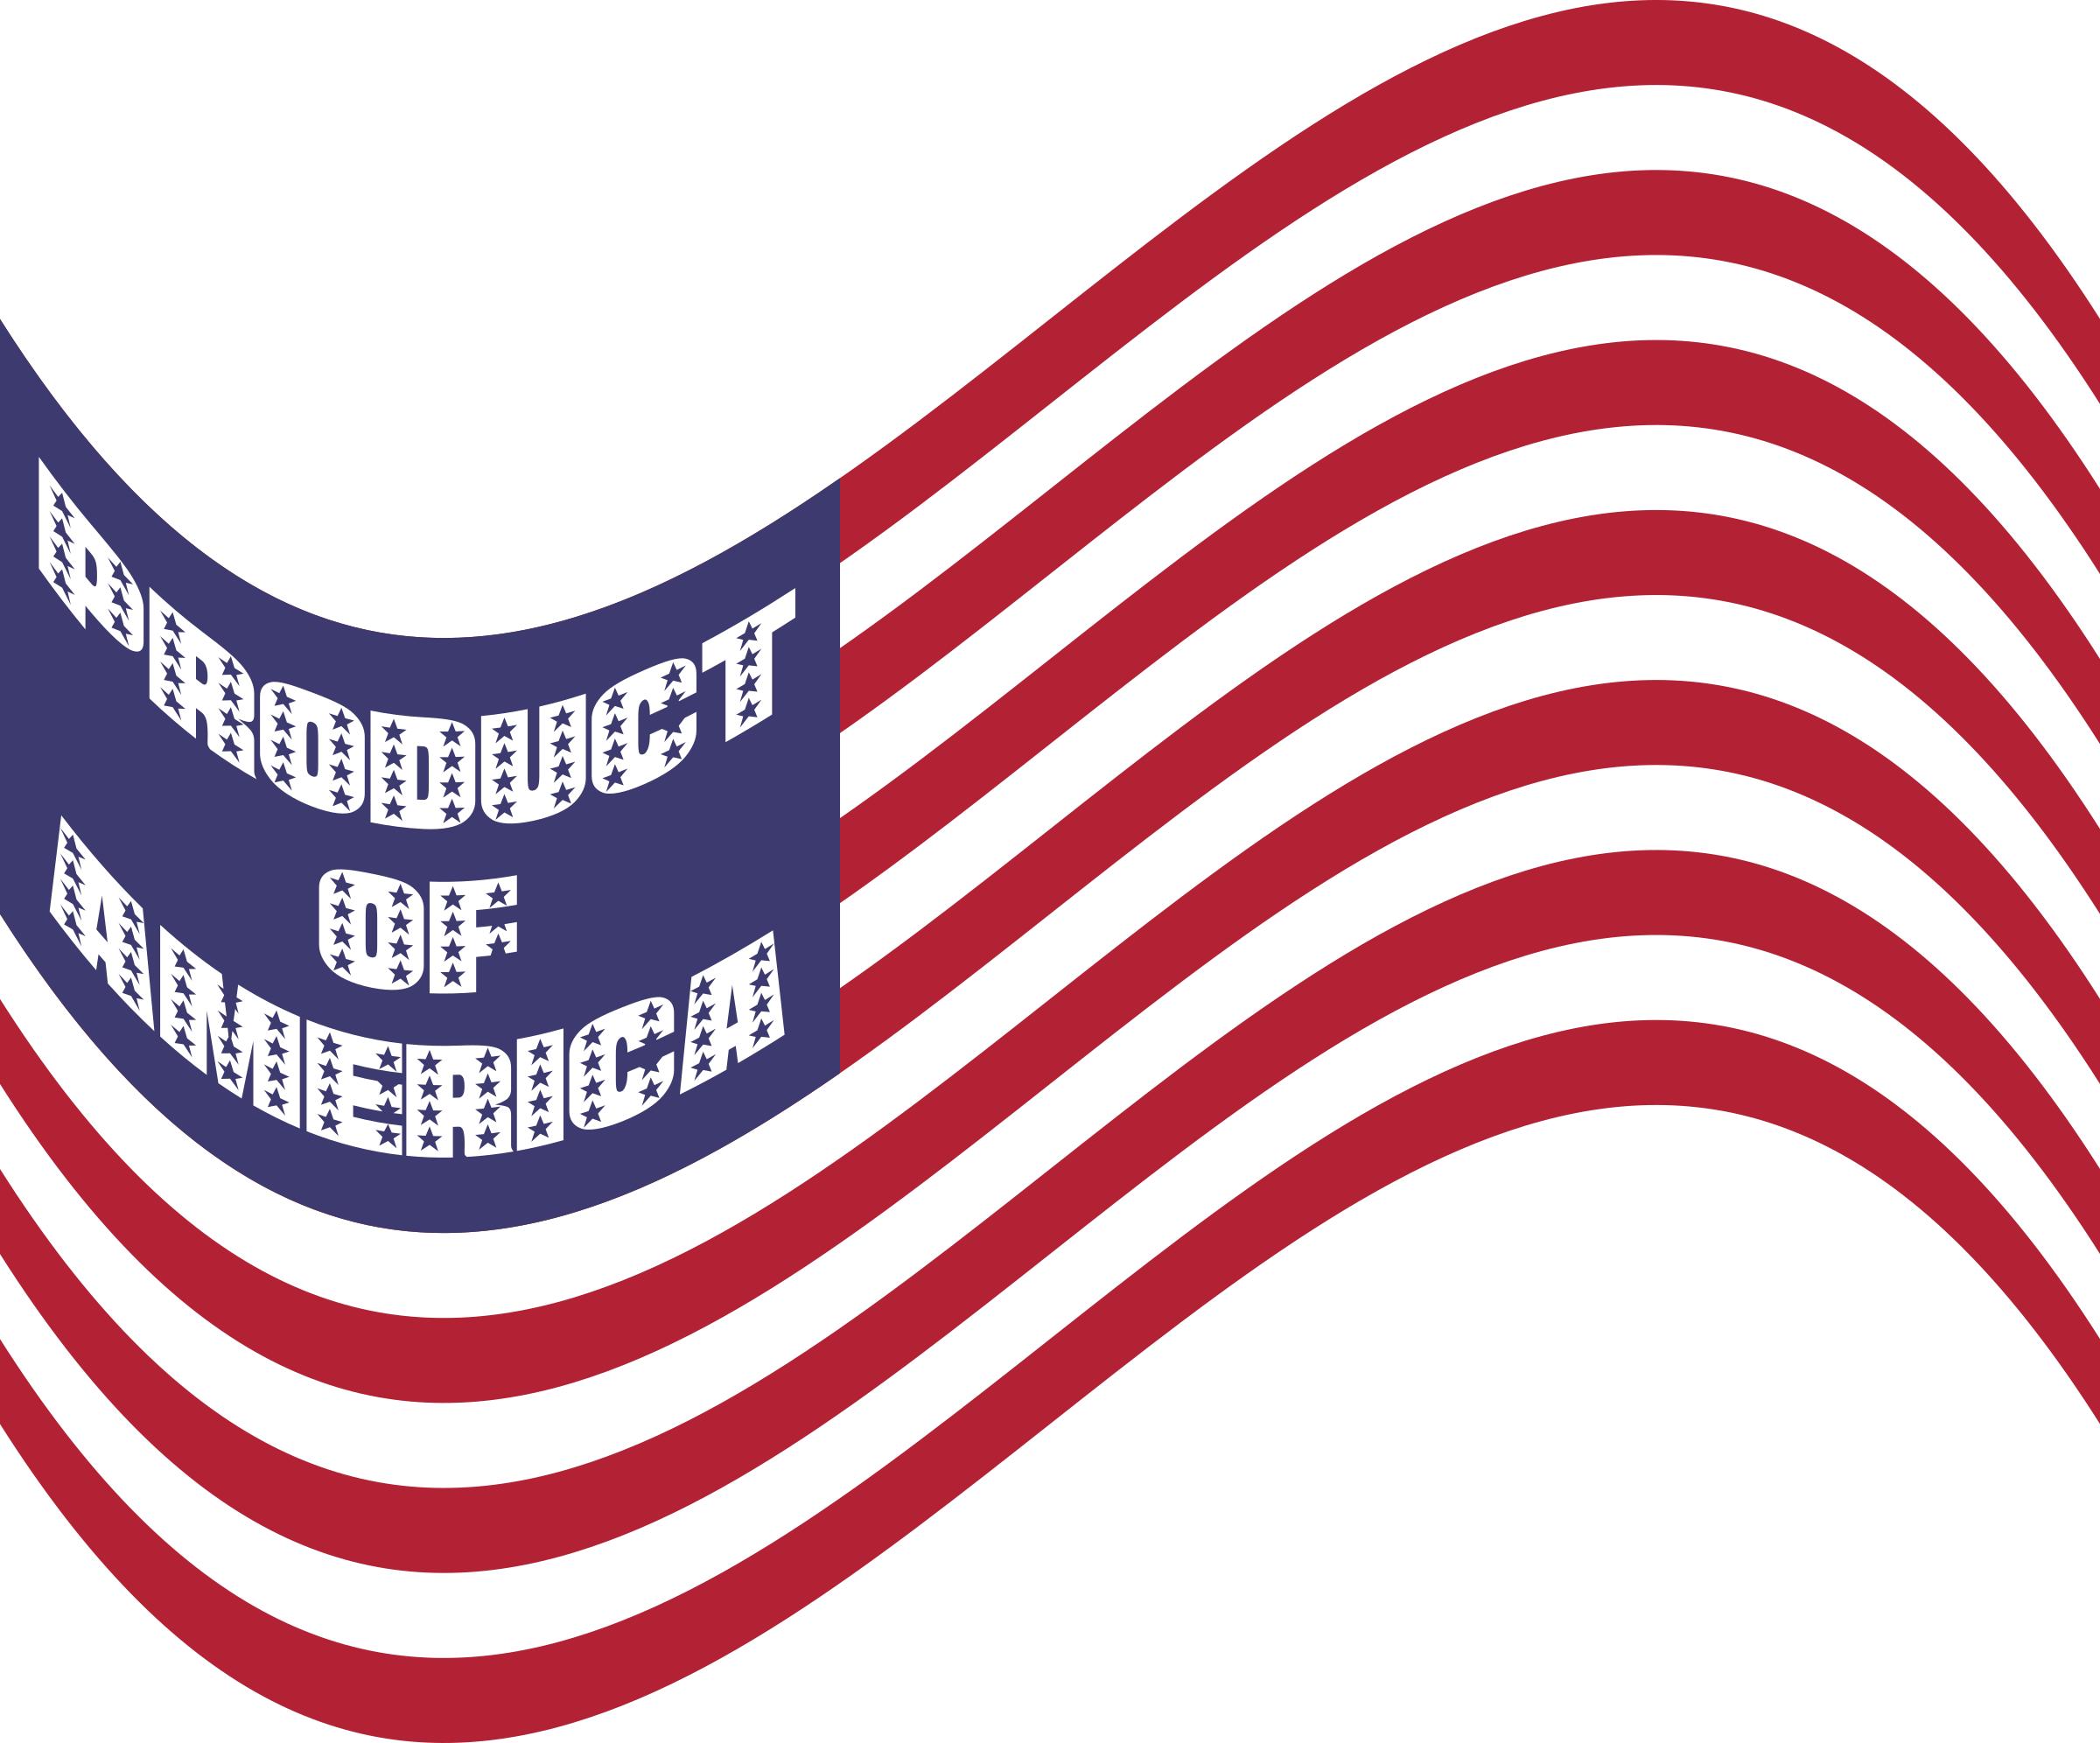 Product Of America Wavy Flag Variation 2 png